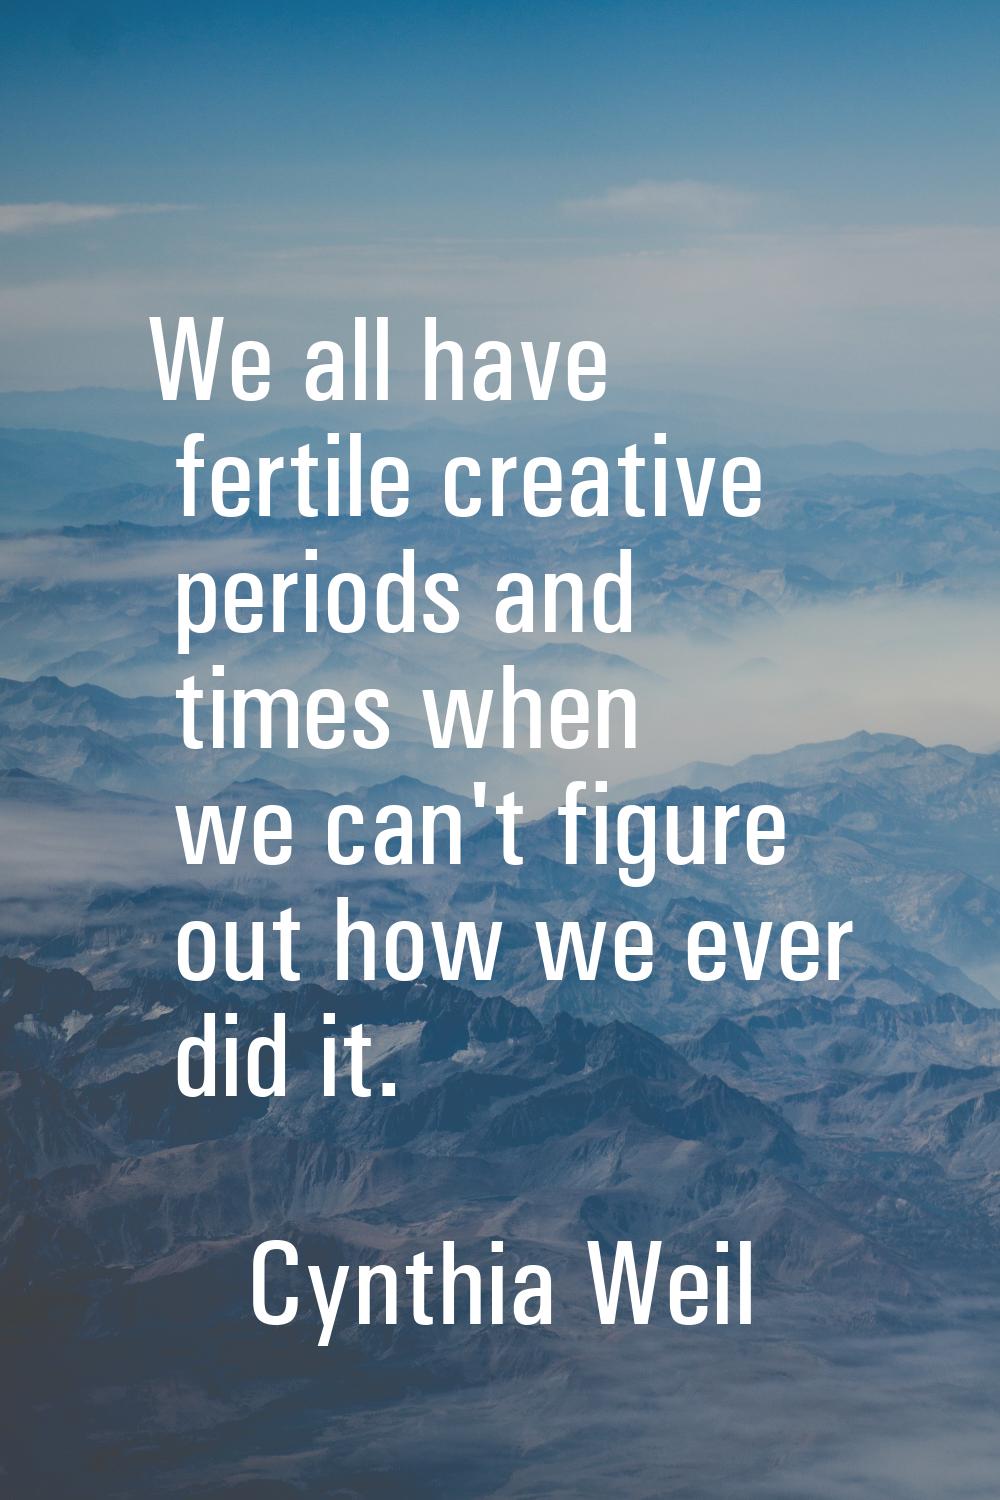 We all have fertile creative periods and times when we can't figure out how we ever did it.